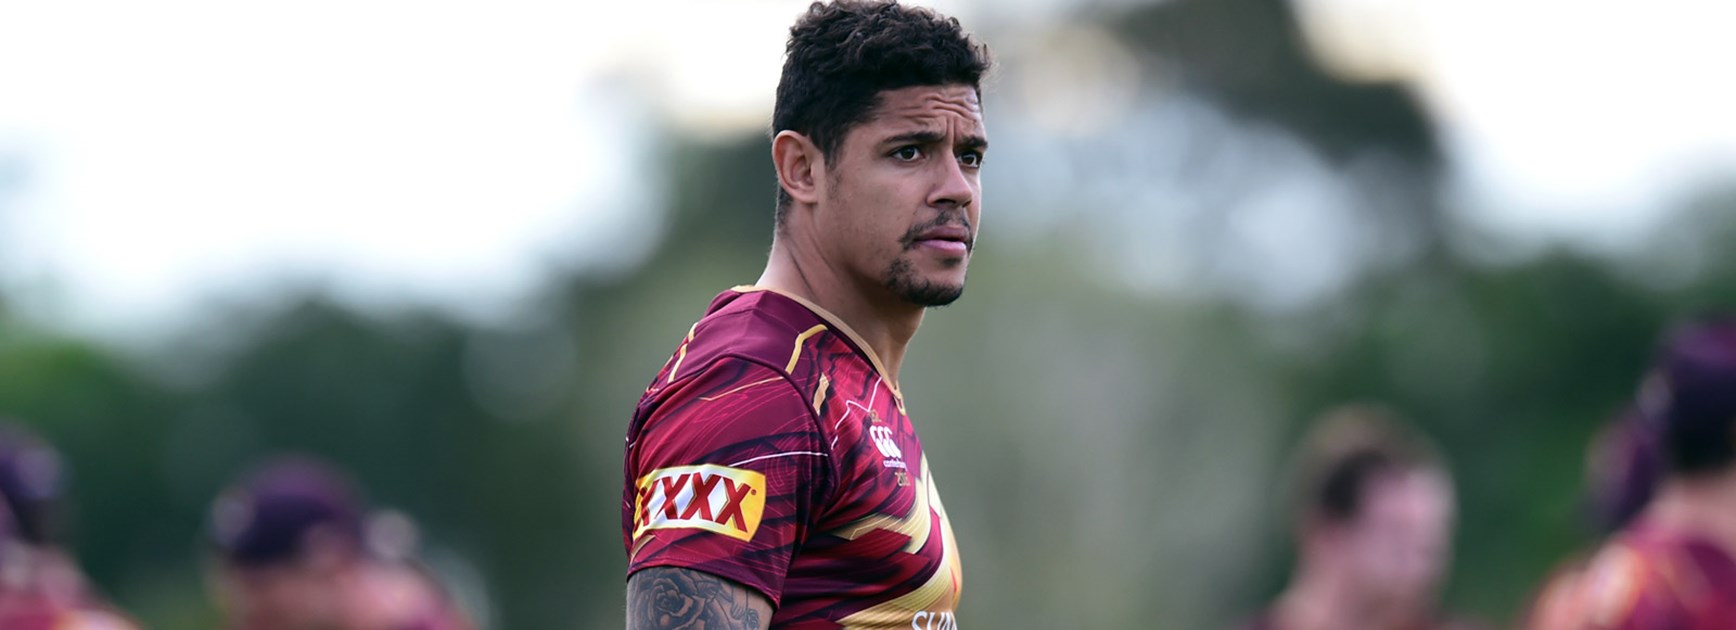 Maroons winger Dane Gagai has been cleared to take his place in Origin II.